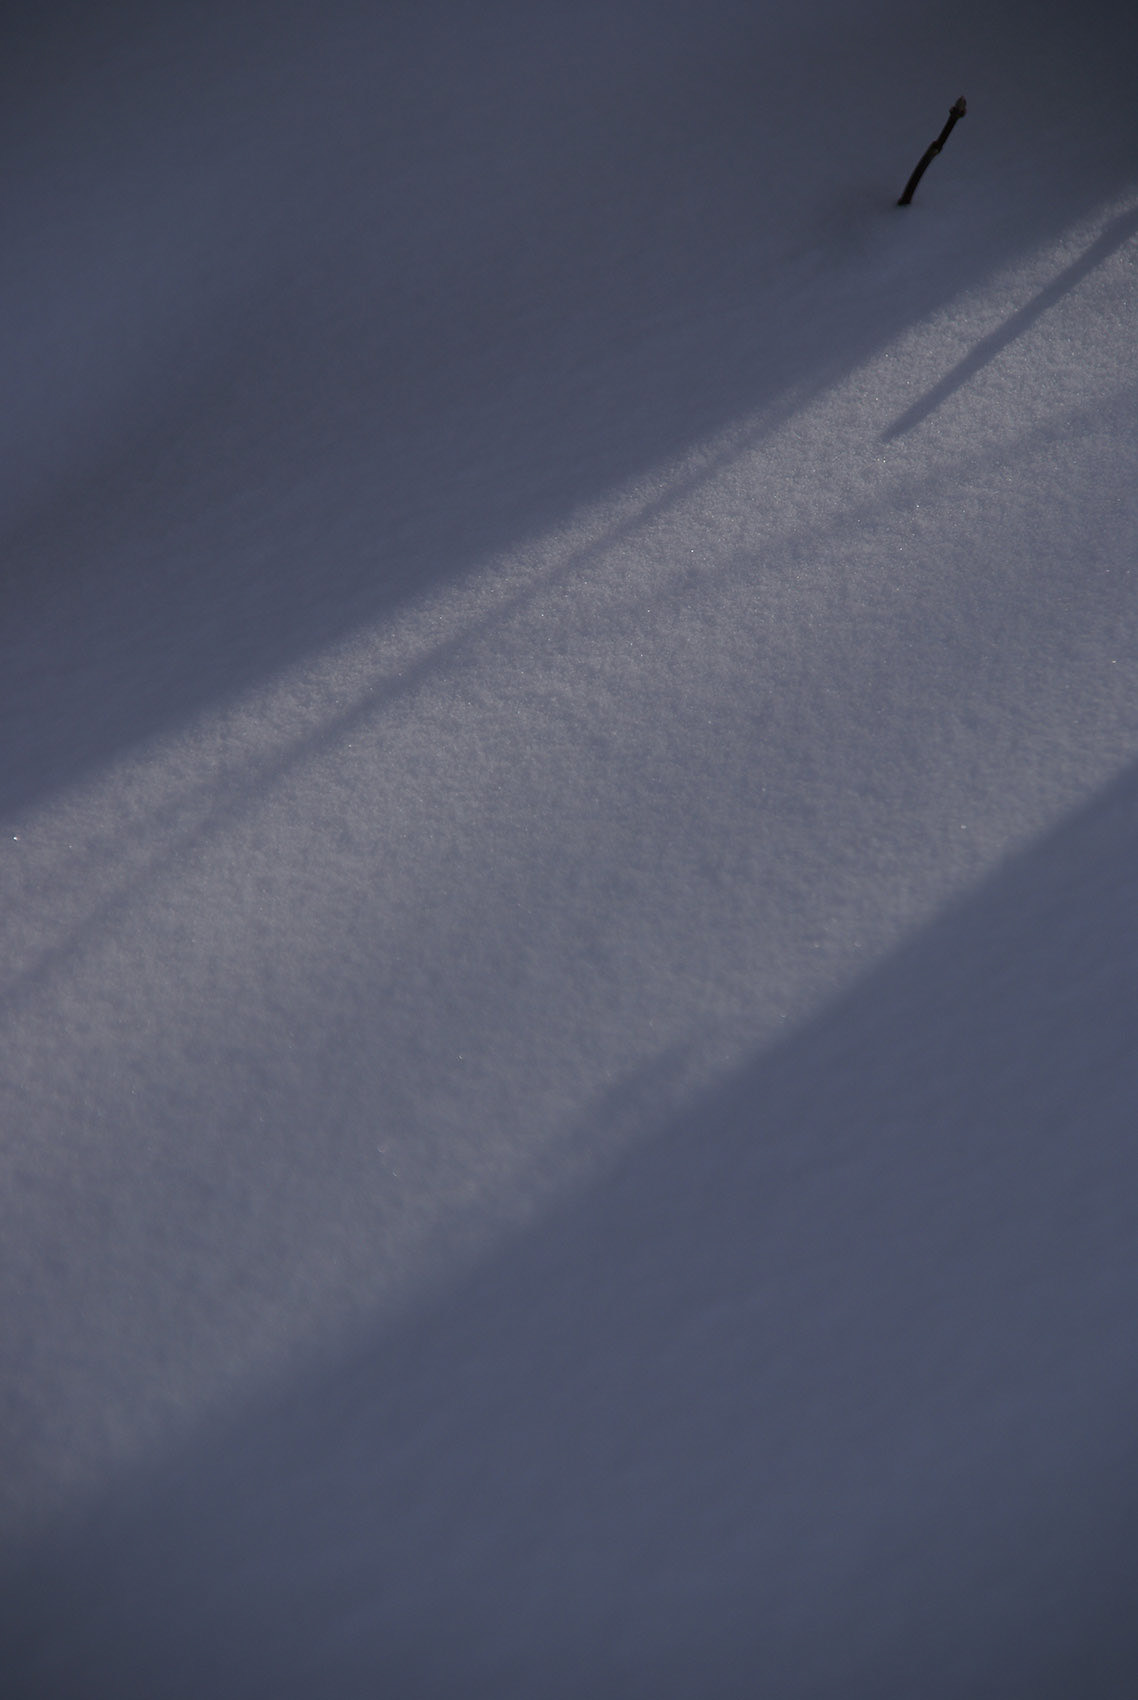 abstraction shadow snow winter